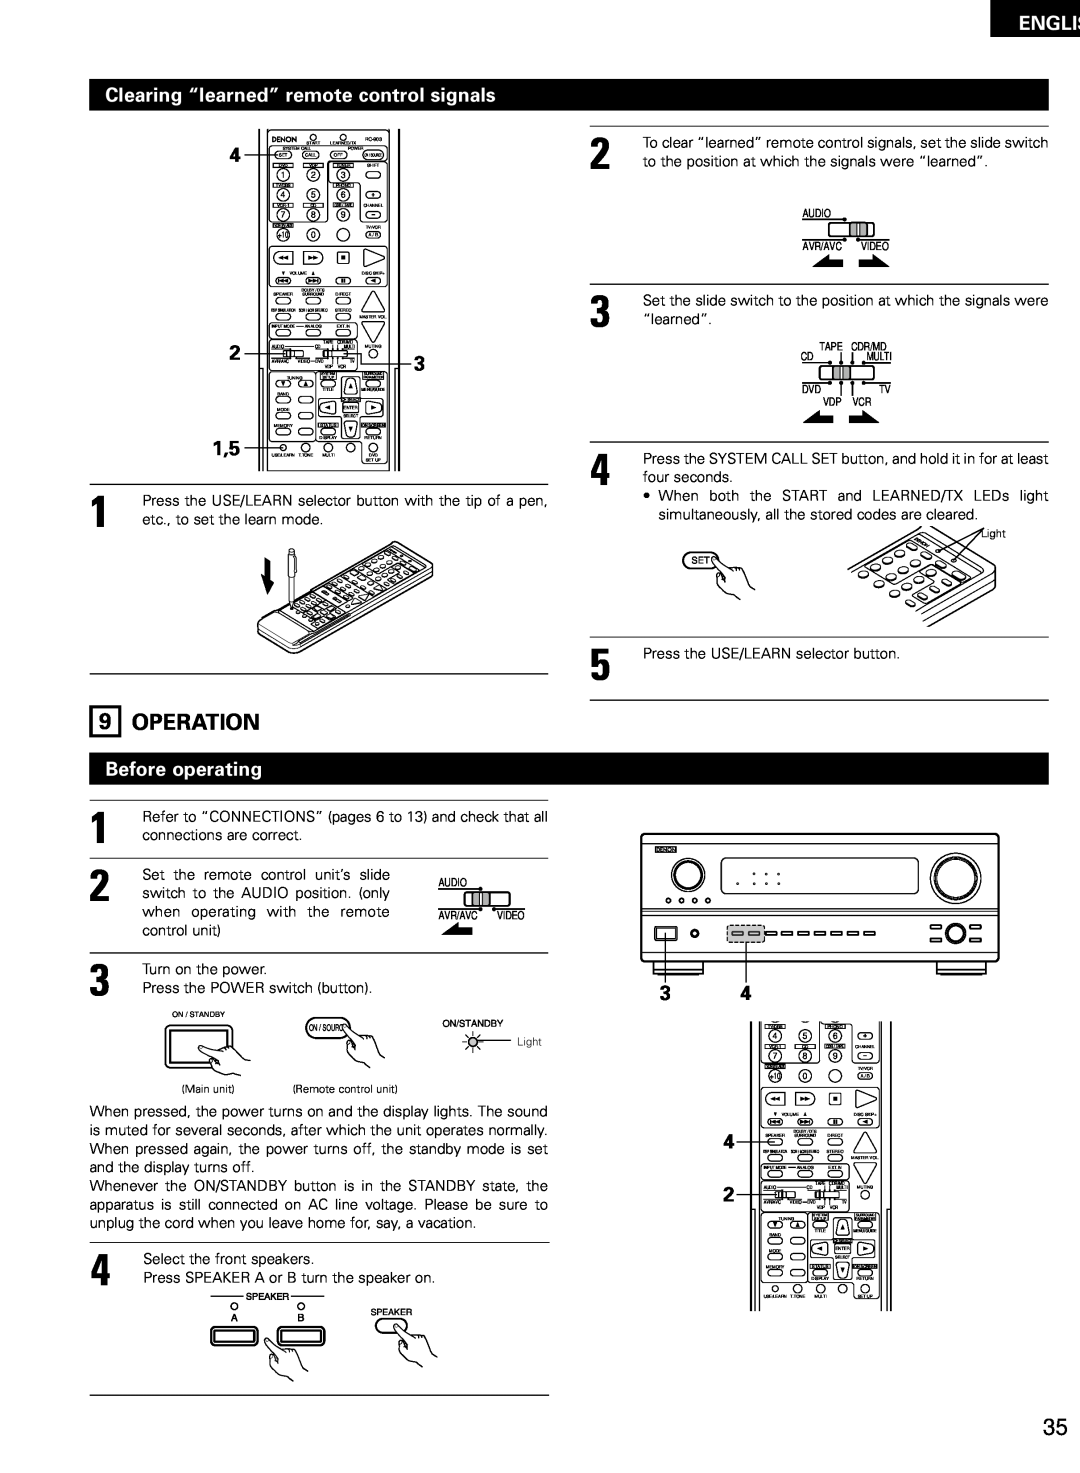 Denon AVR-2802/982 operating instructions Operation, ENGLIS Clearing “learned” remote control signals, Before operating 